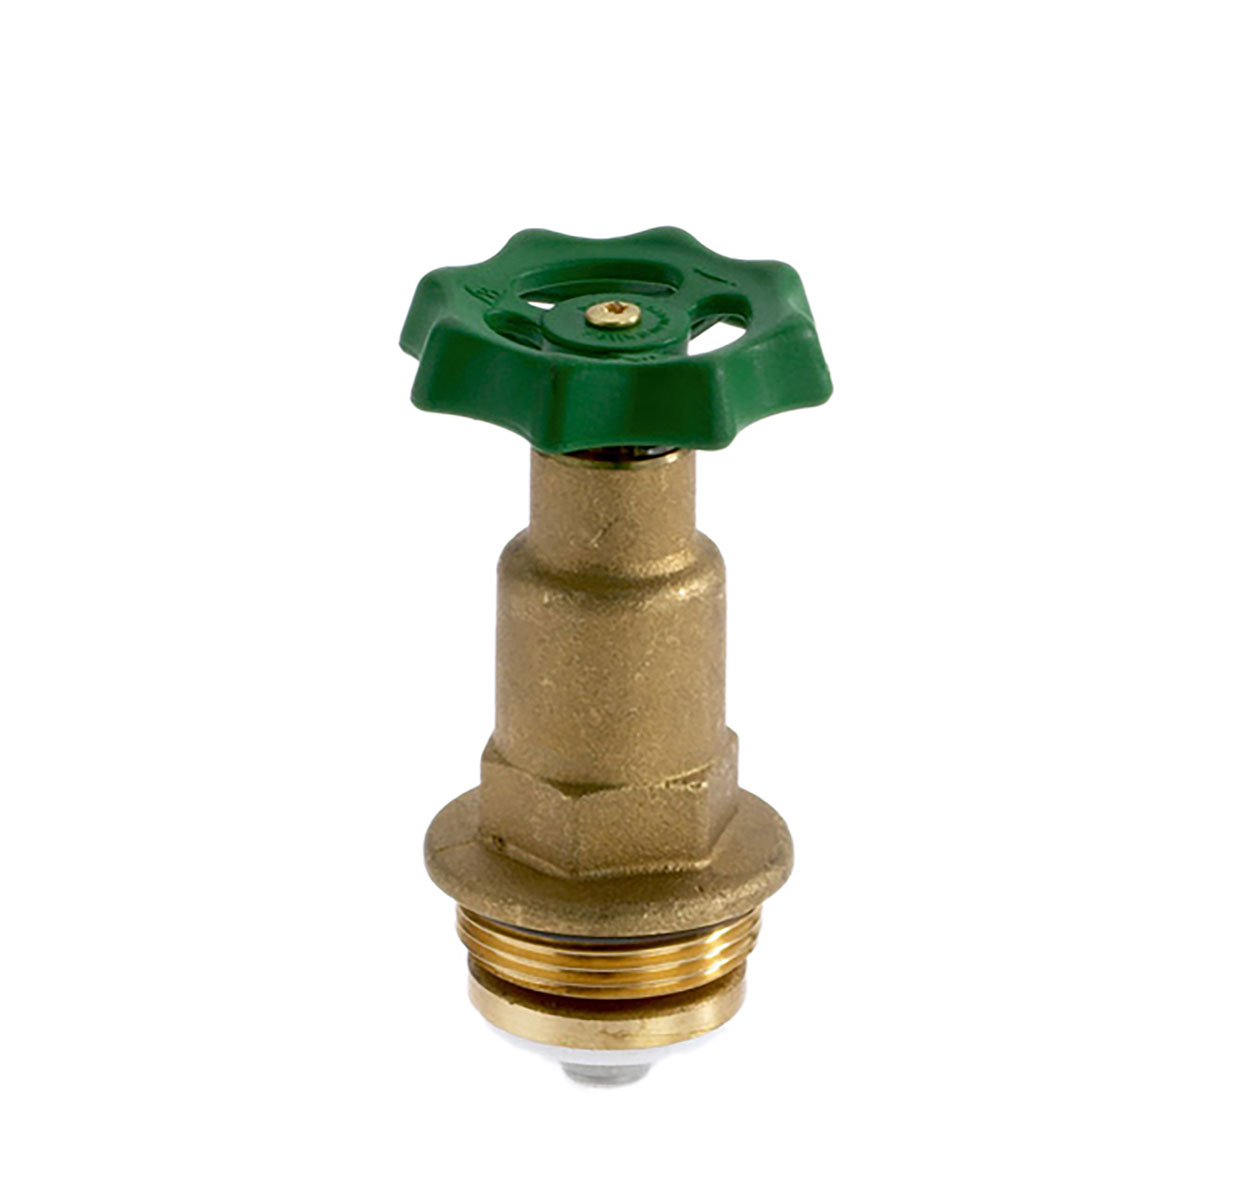 1227650 - Brass Upper-part with grease chamber with PTFE (Teflon) flat seal, for free-flow valves, non-rising spindle